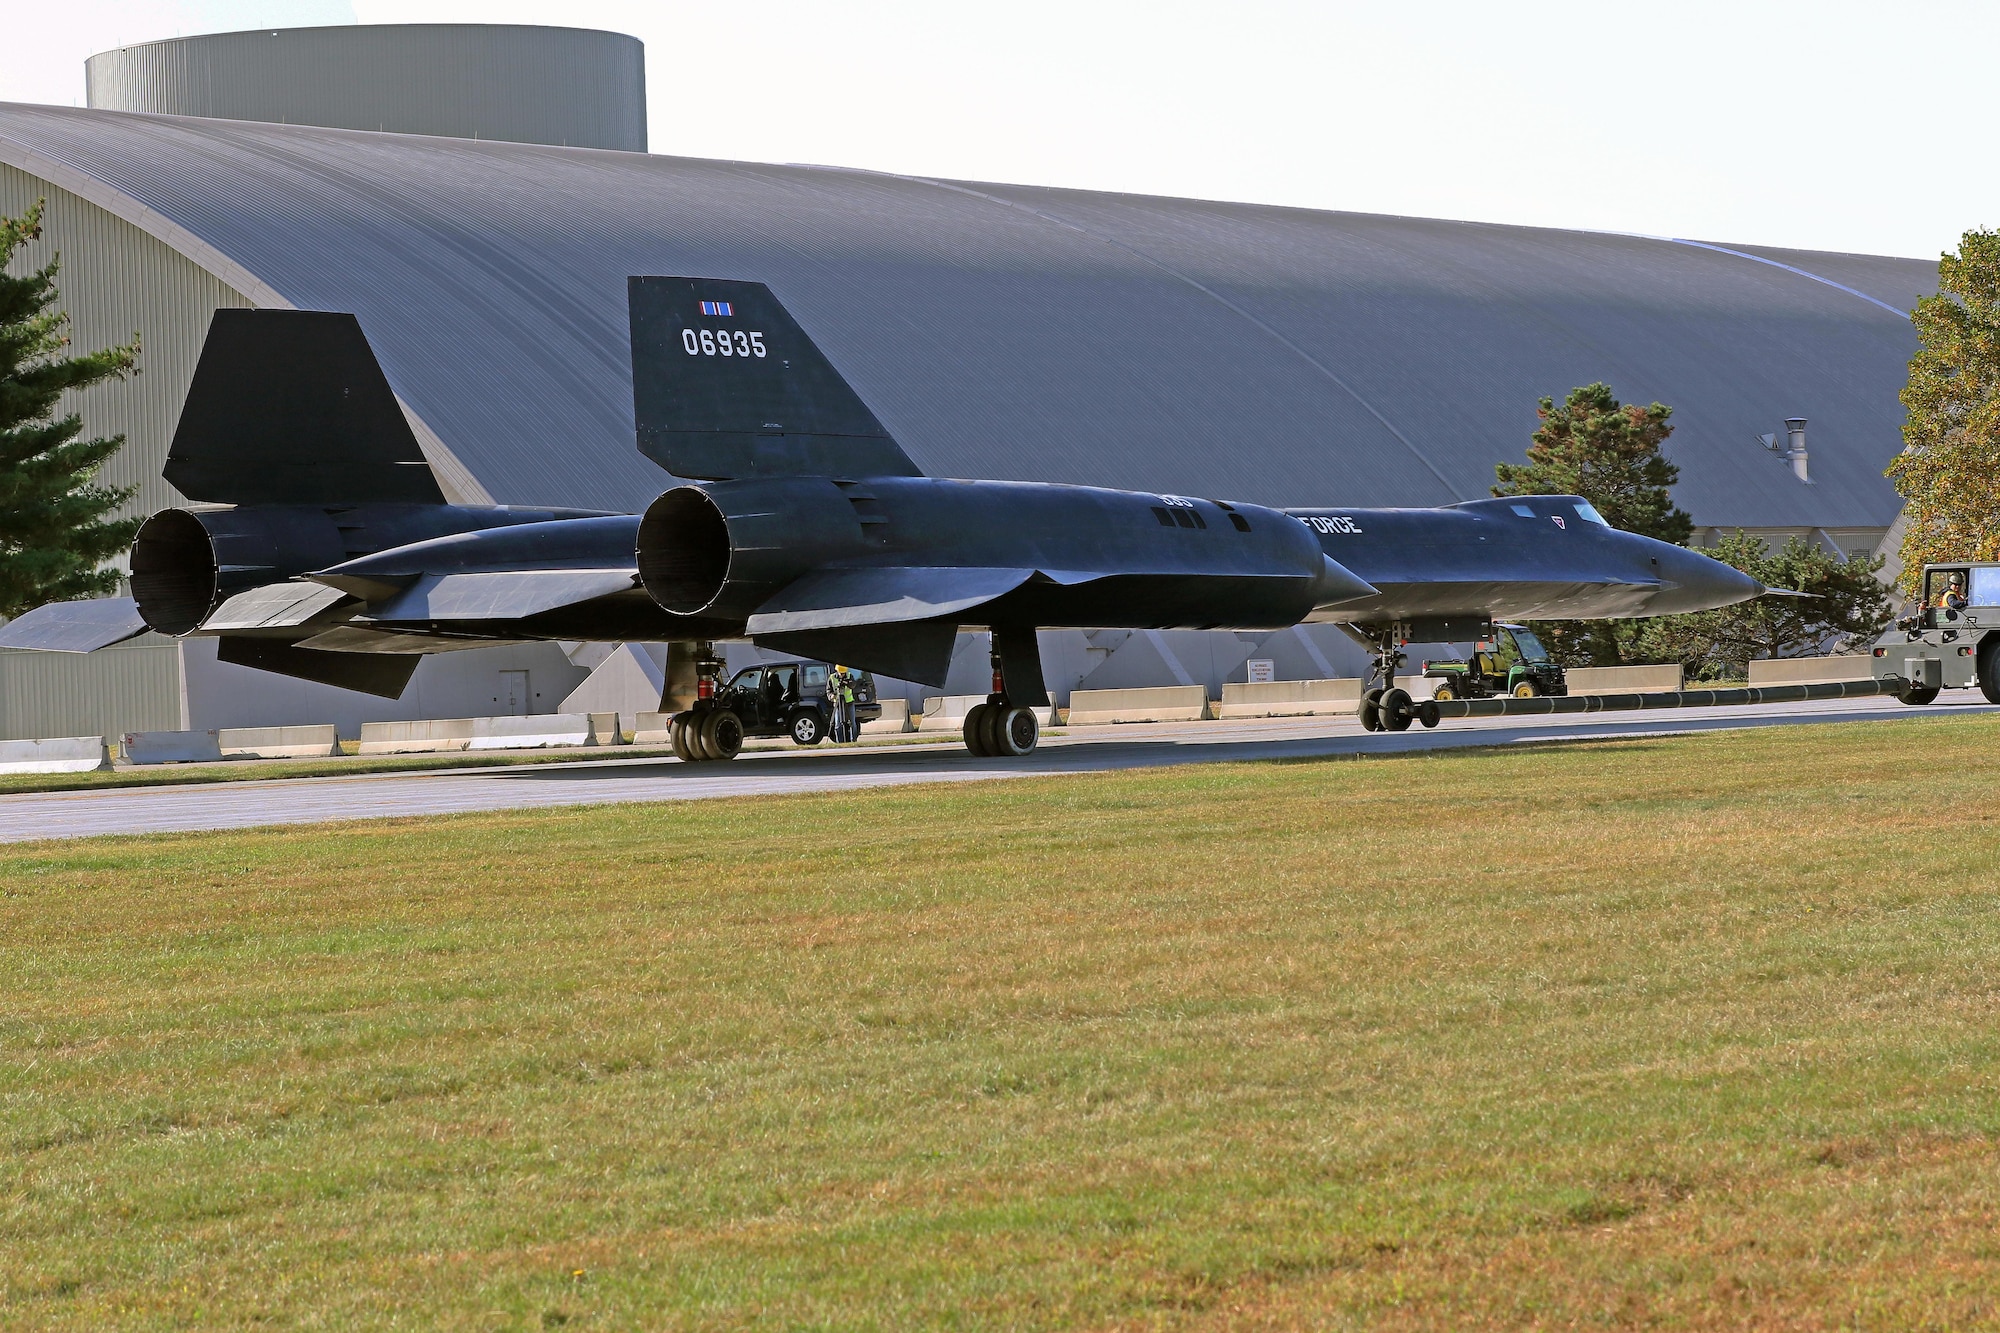 Restoration staff move the Lockheed YF-12A into the new fourth building at the National Museum of the U.S. Air Force on Oct. 13, 2015. (U.S. Air Force photo by Don Popp) 